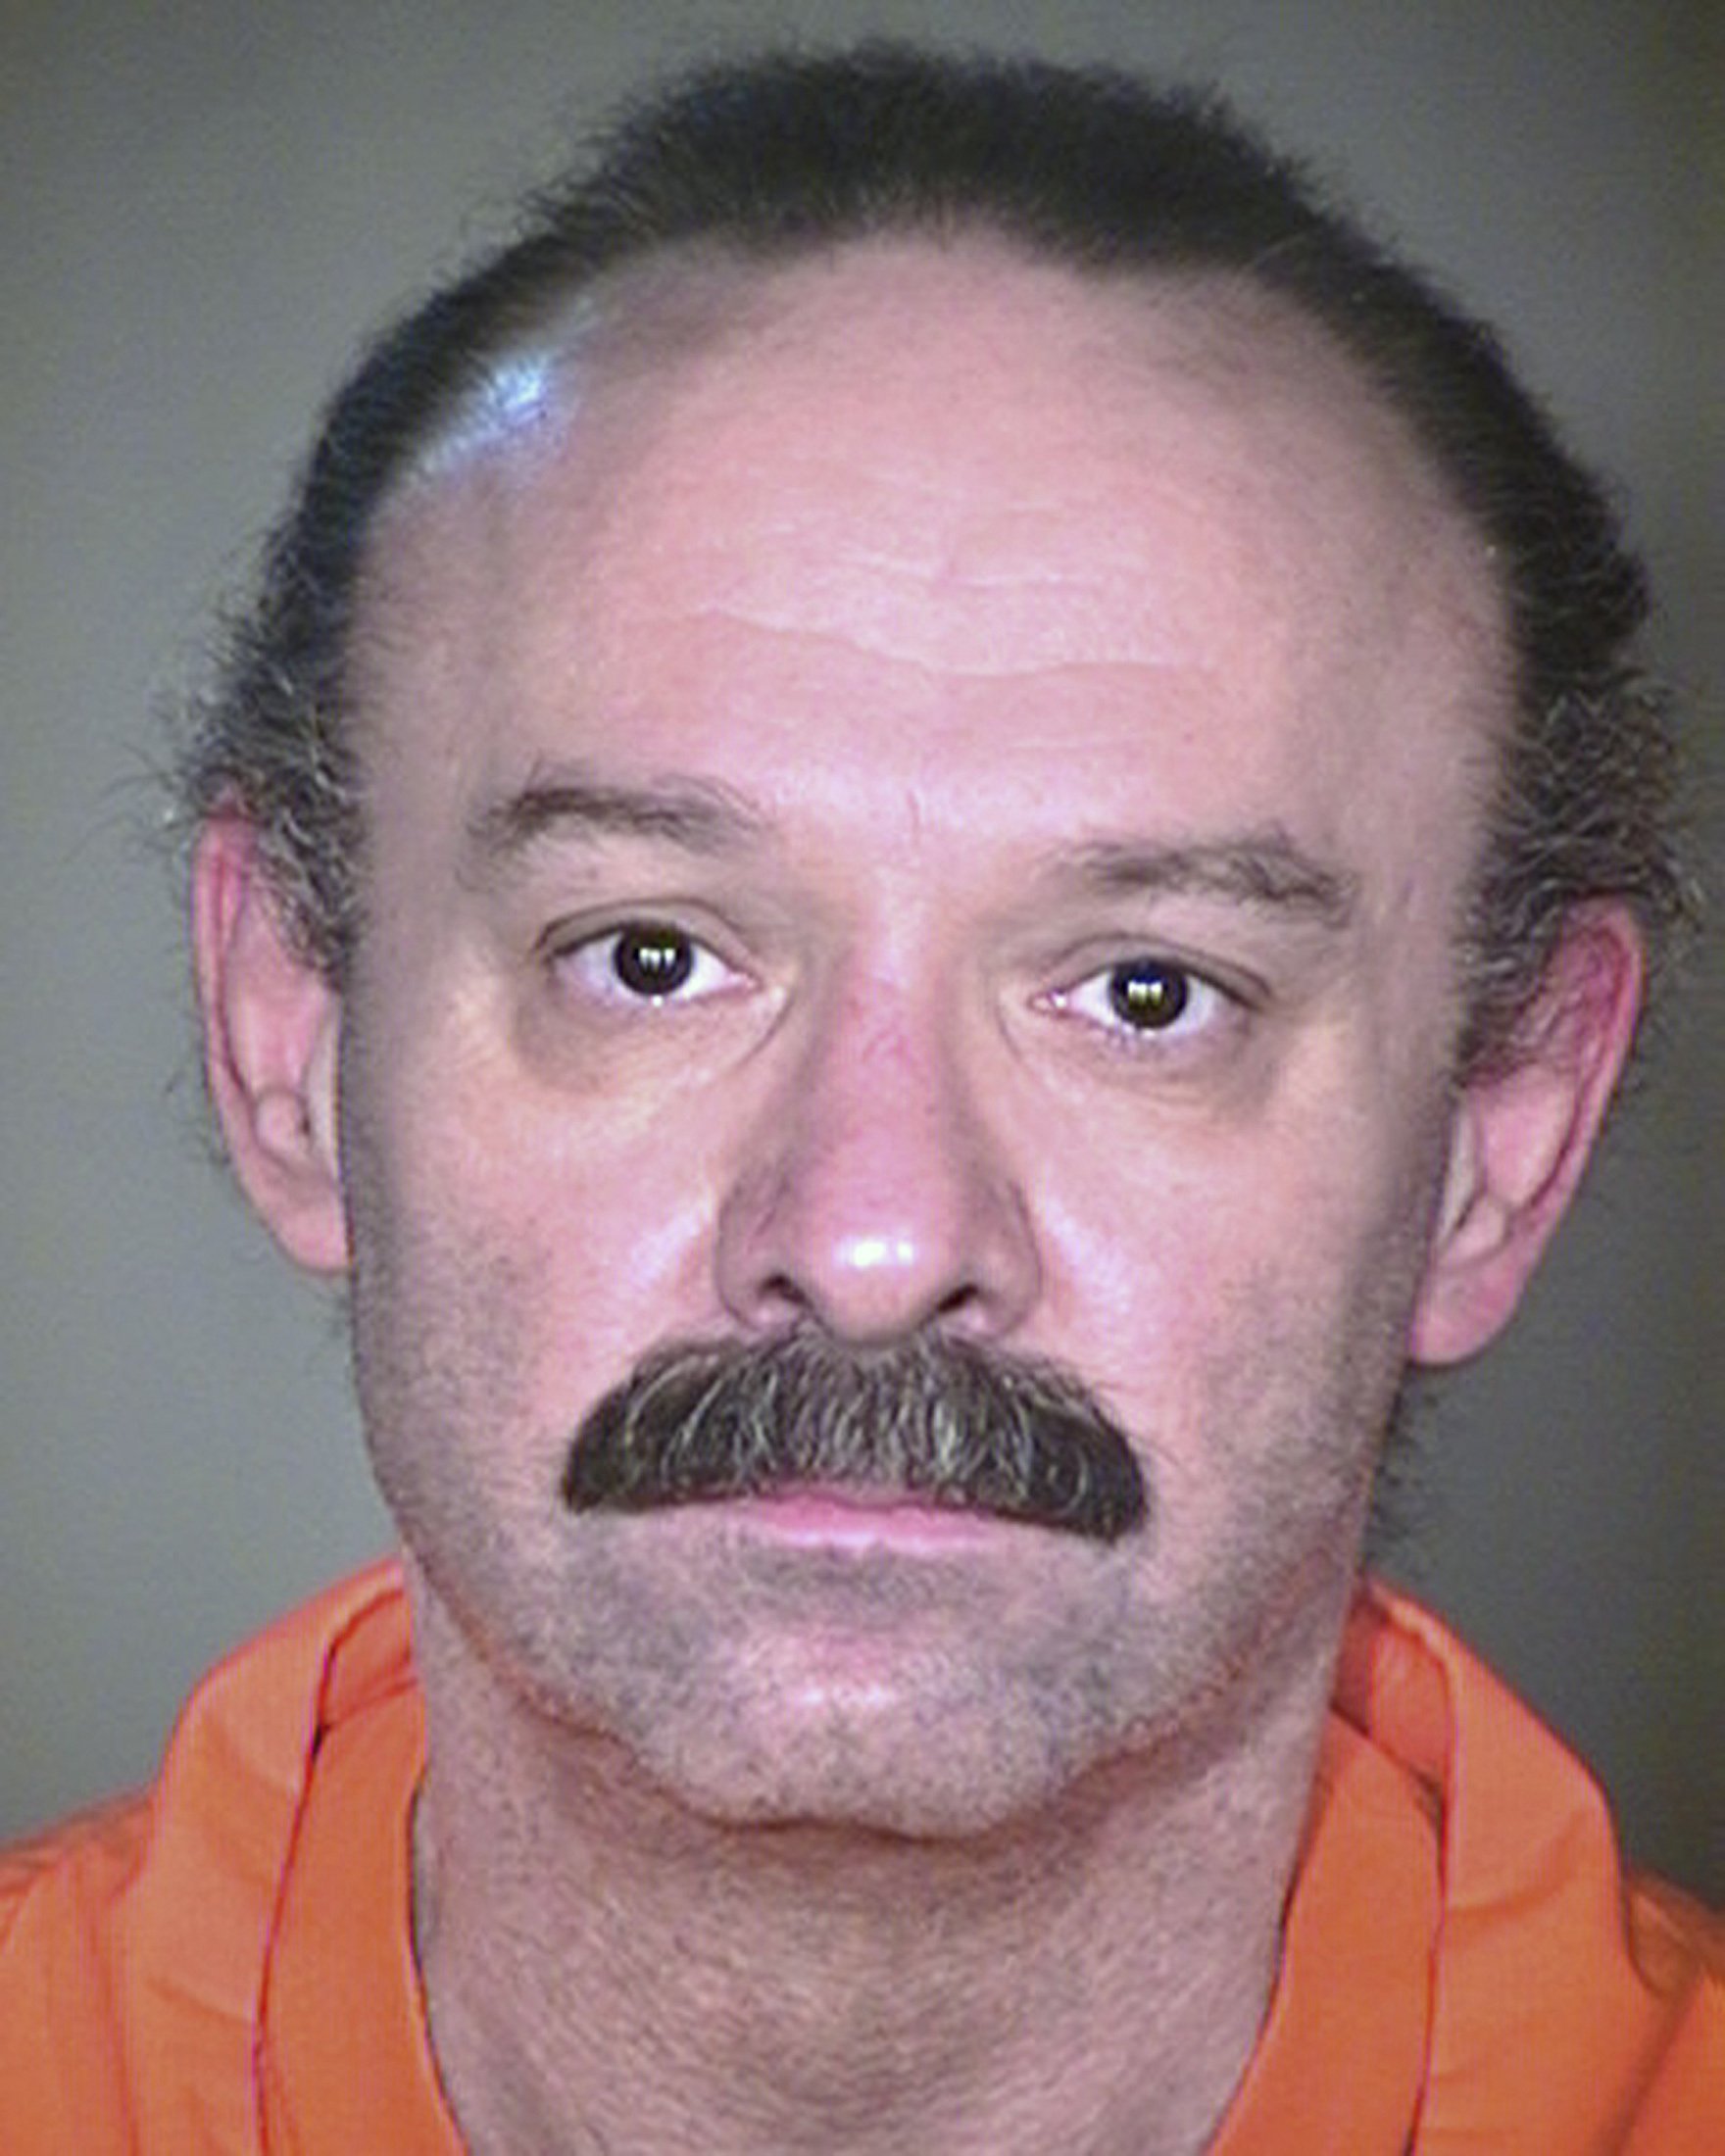 Joseph Wood is pictured in this booking photo. (Arizona Department of Corrections—Reuters)